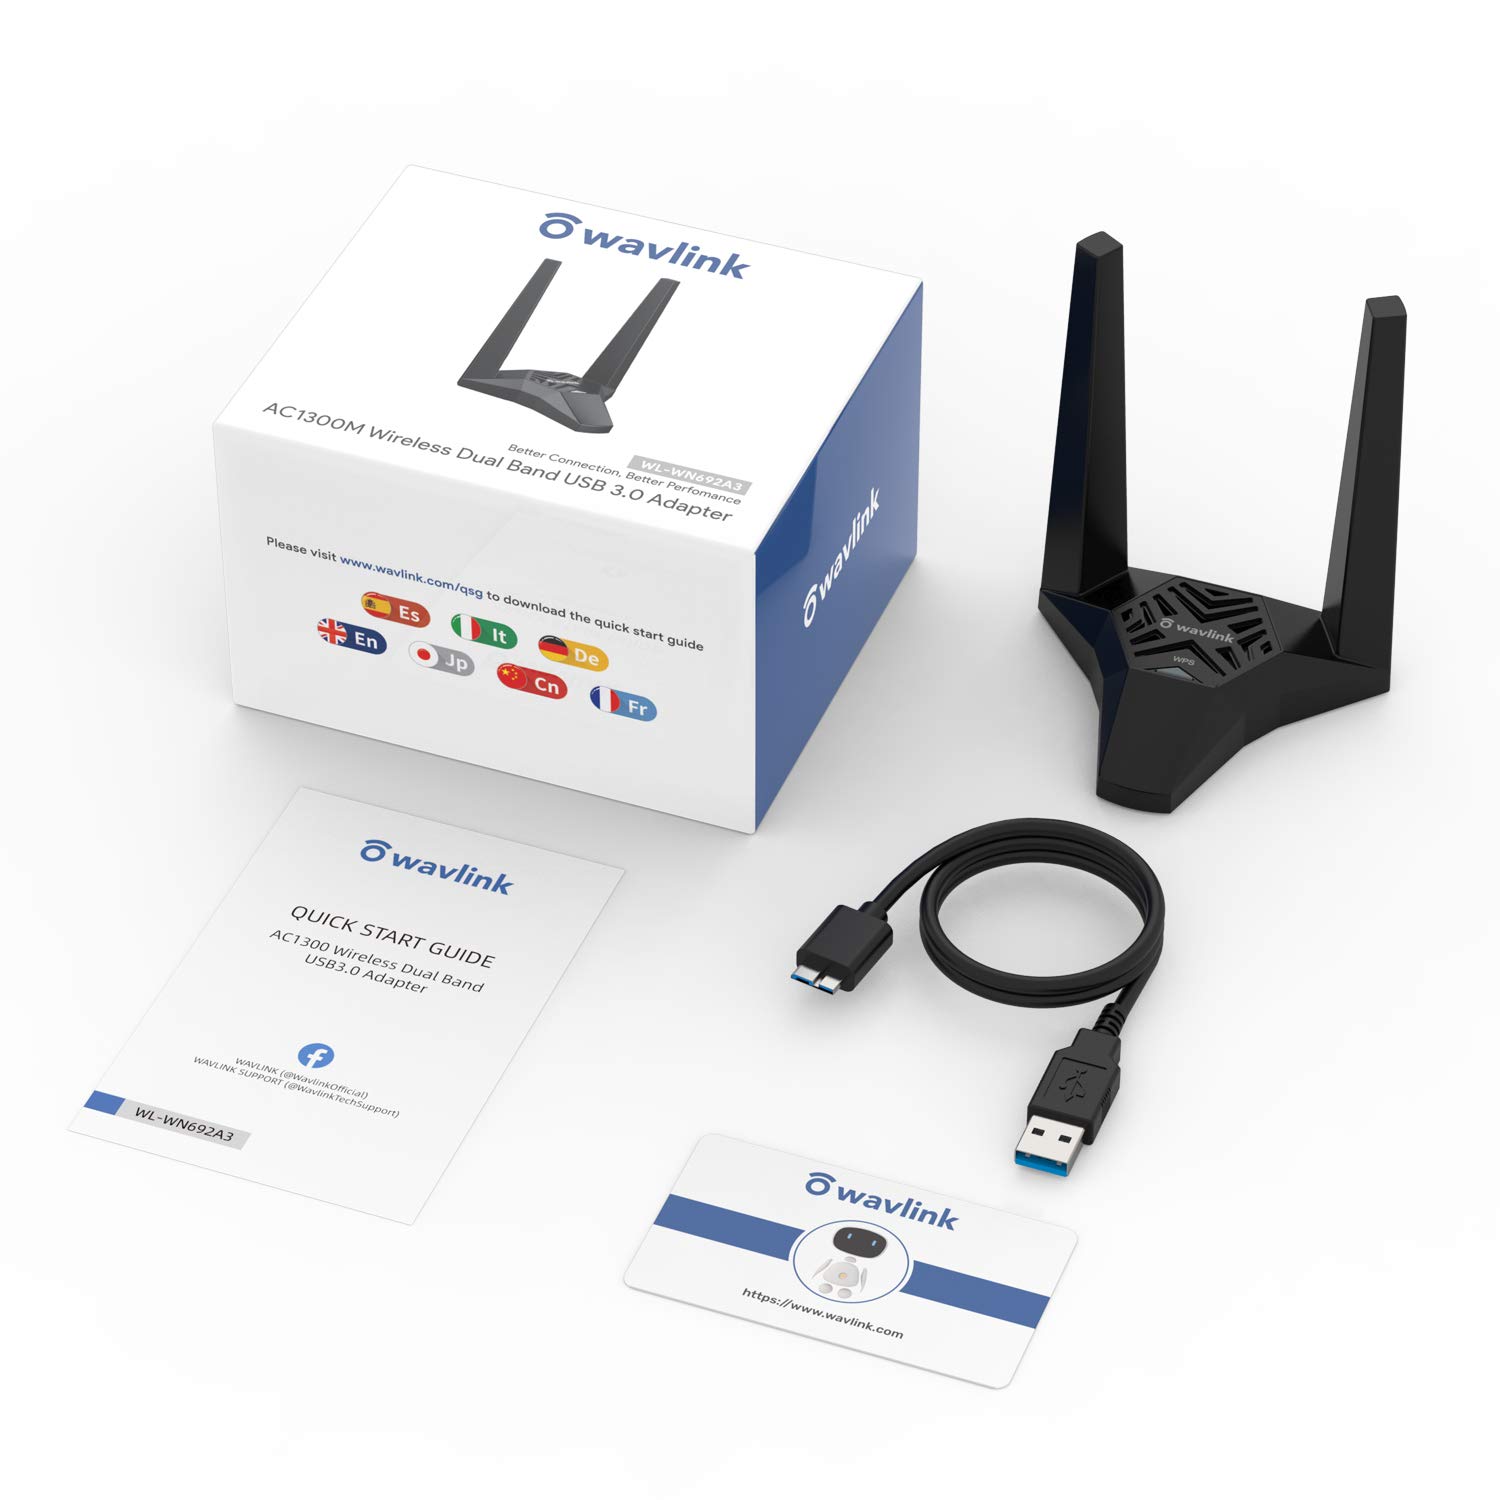 Wavlink USB 3.0 WiFi Adapter for PC, AC1300 Dual Band 5GHz+2.4GHz Wireless Network Adapter with High Gain Antennas for Windows XP/Vista/7/8/8.1/10/11 MacOS 10.7-10.15